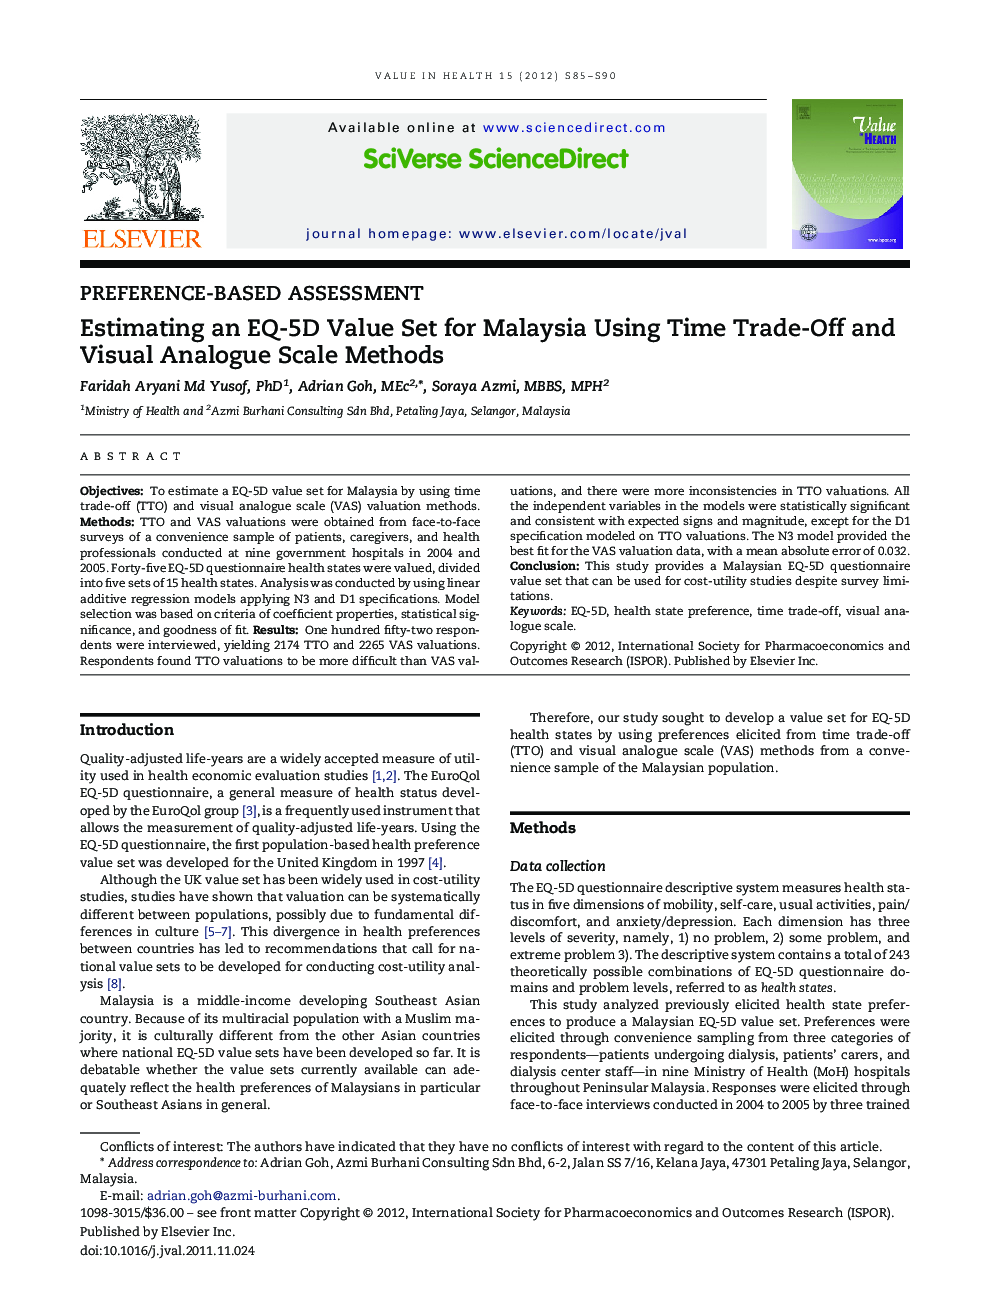 Estimating an EQ-5D Value Set for Malaysia Using Time Trade-Off and Visual Analogue Scale Methods 